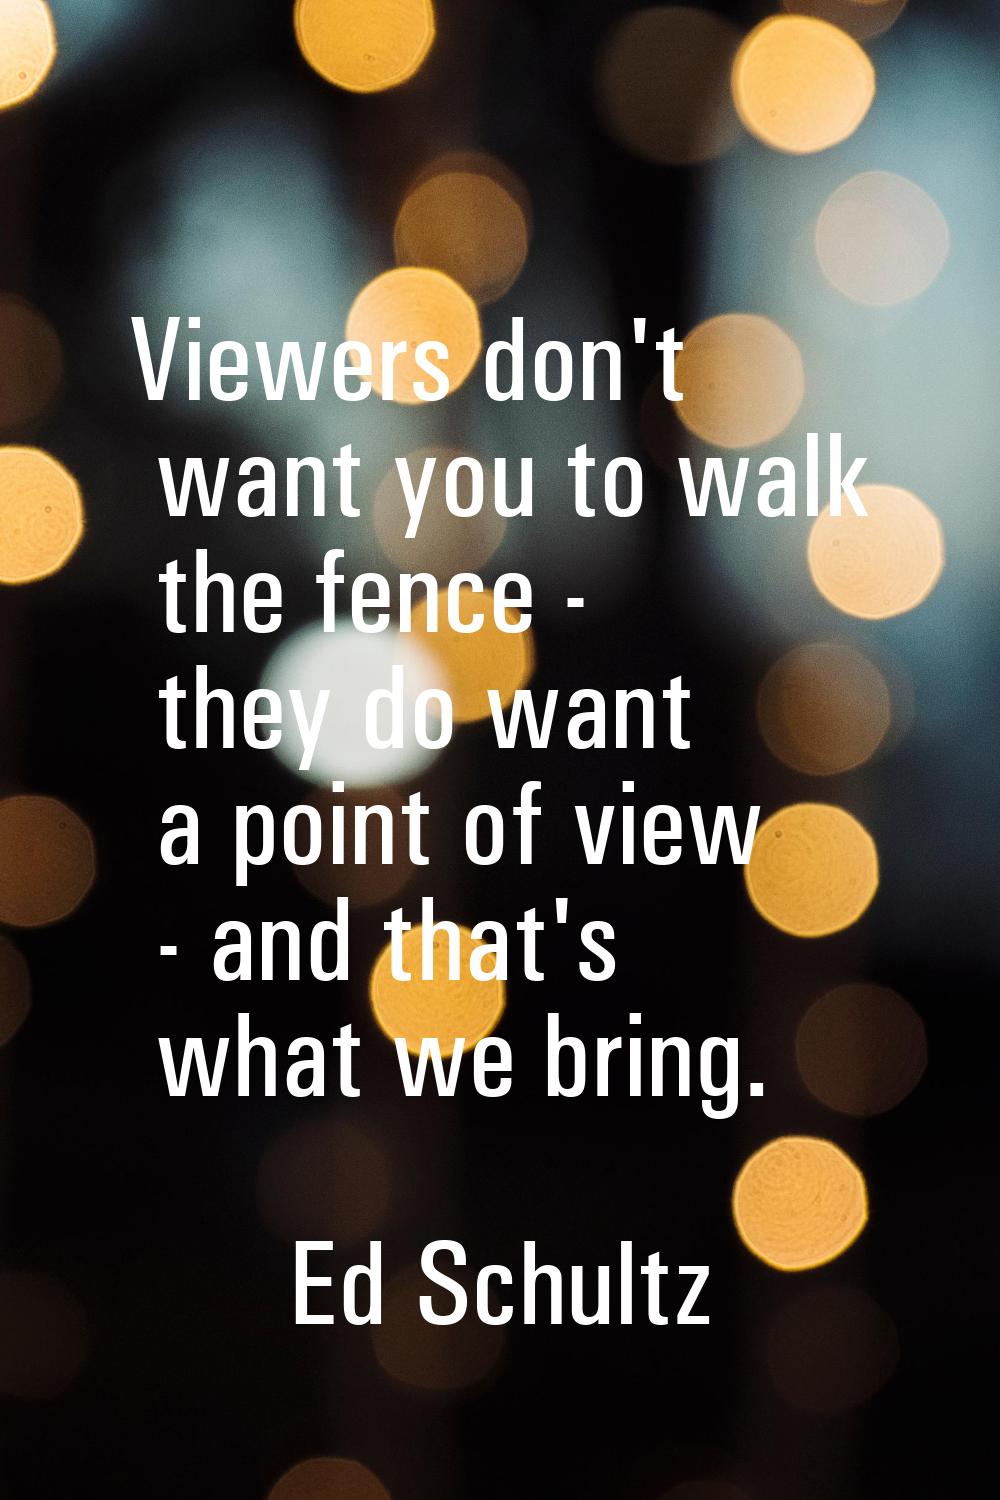 Viewers don't want you to walk the fence - they do want a point of view - and that's what we bring.